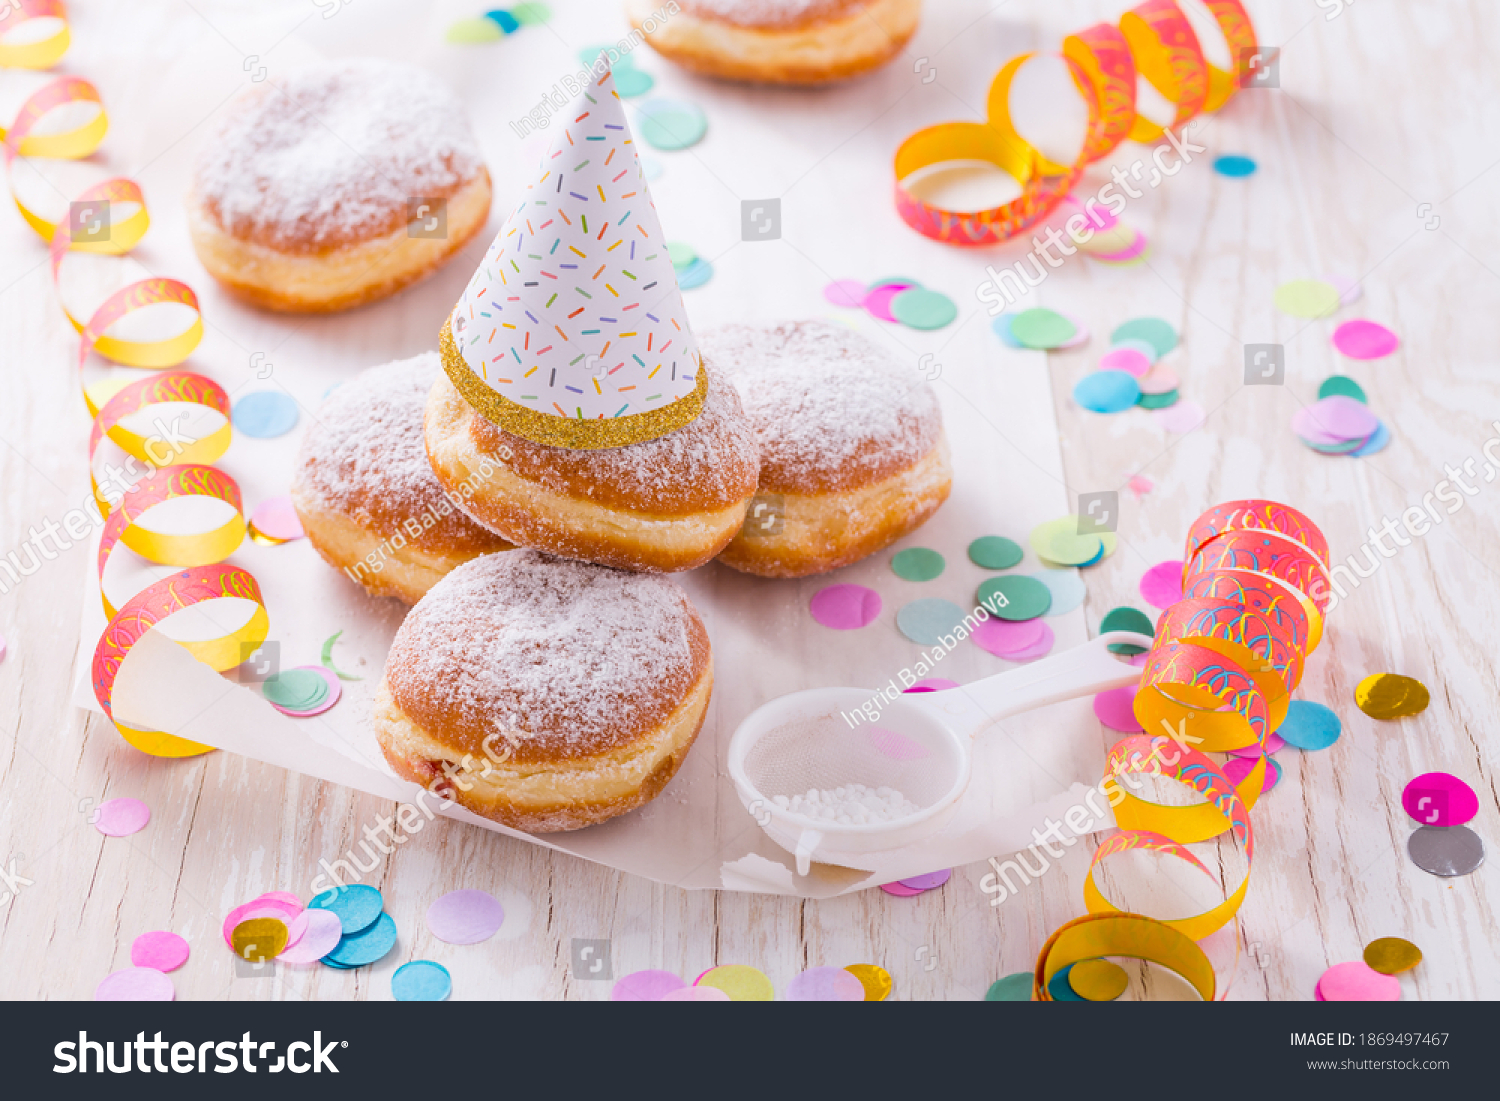 Traditional Berliner with party hat for carnival and party. German Krapfen or donuts with streamers and confetti. Colorful carnival or birthday image #1869497467